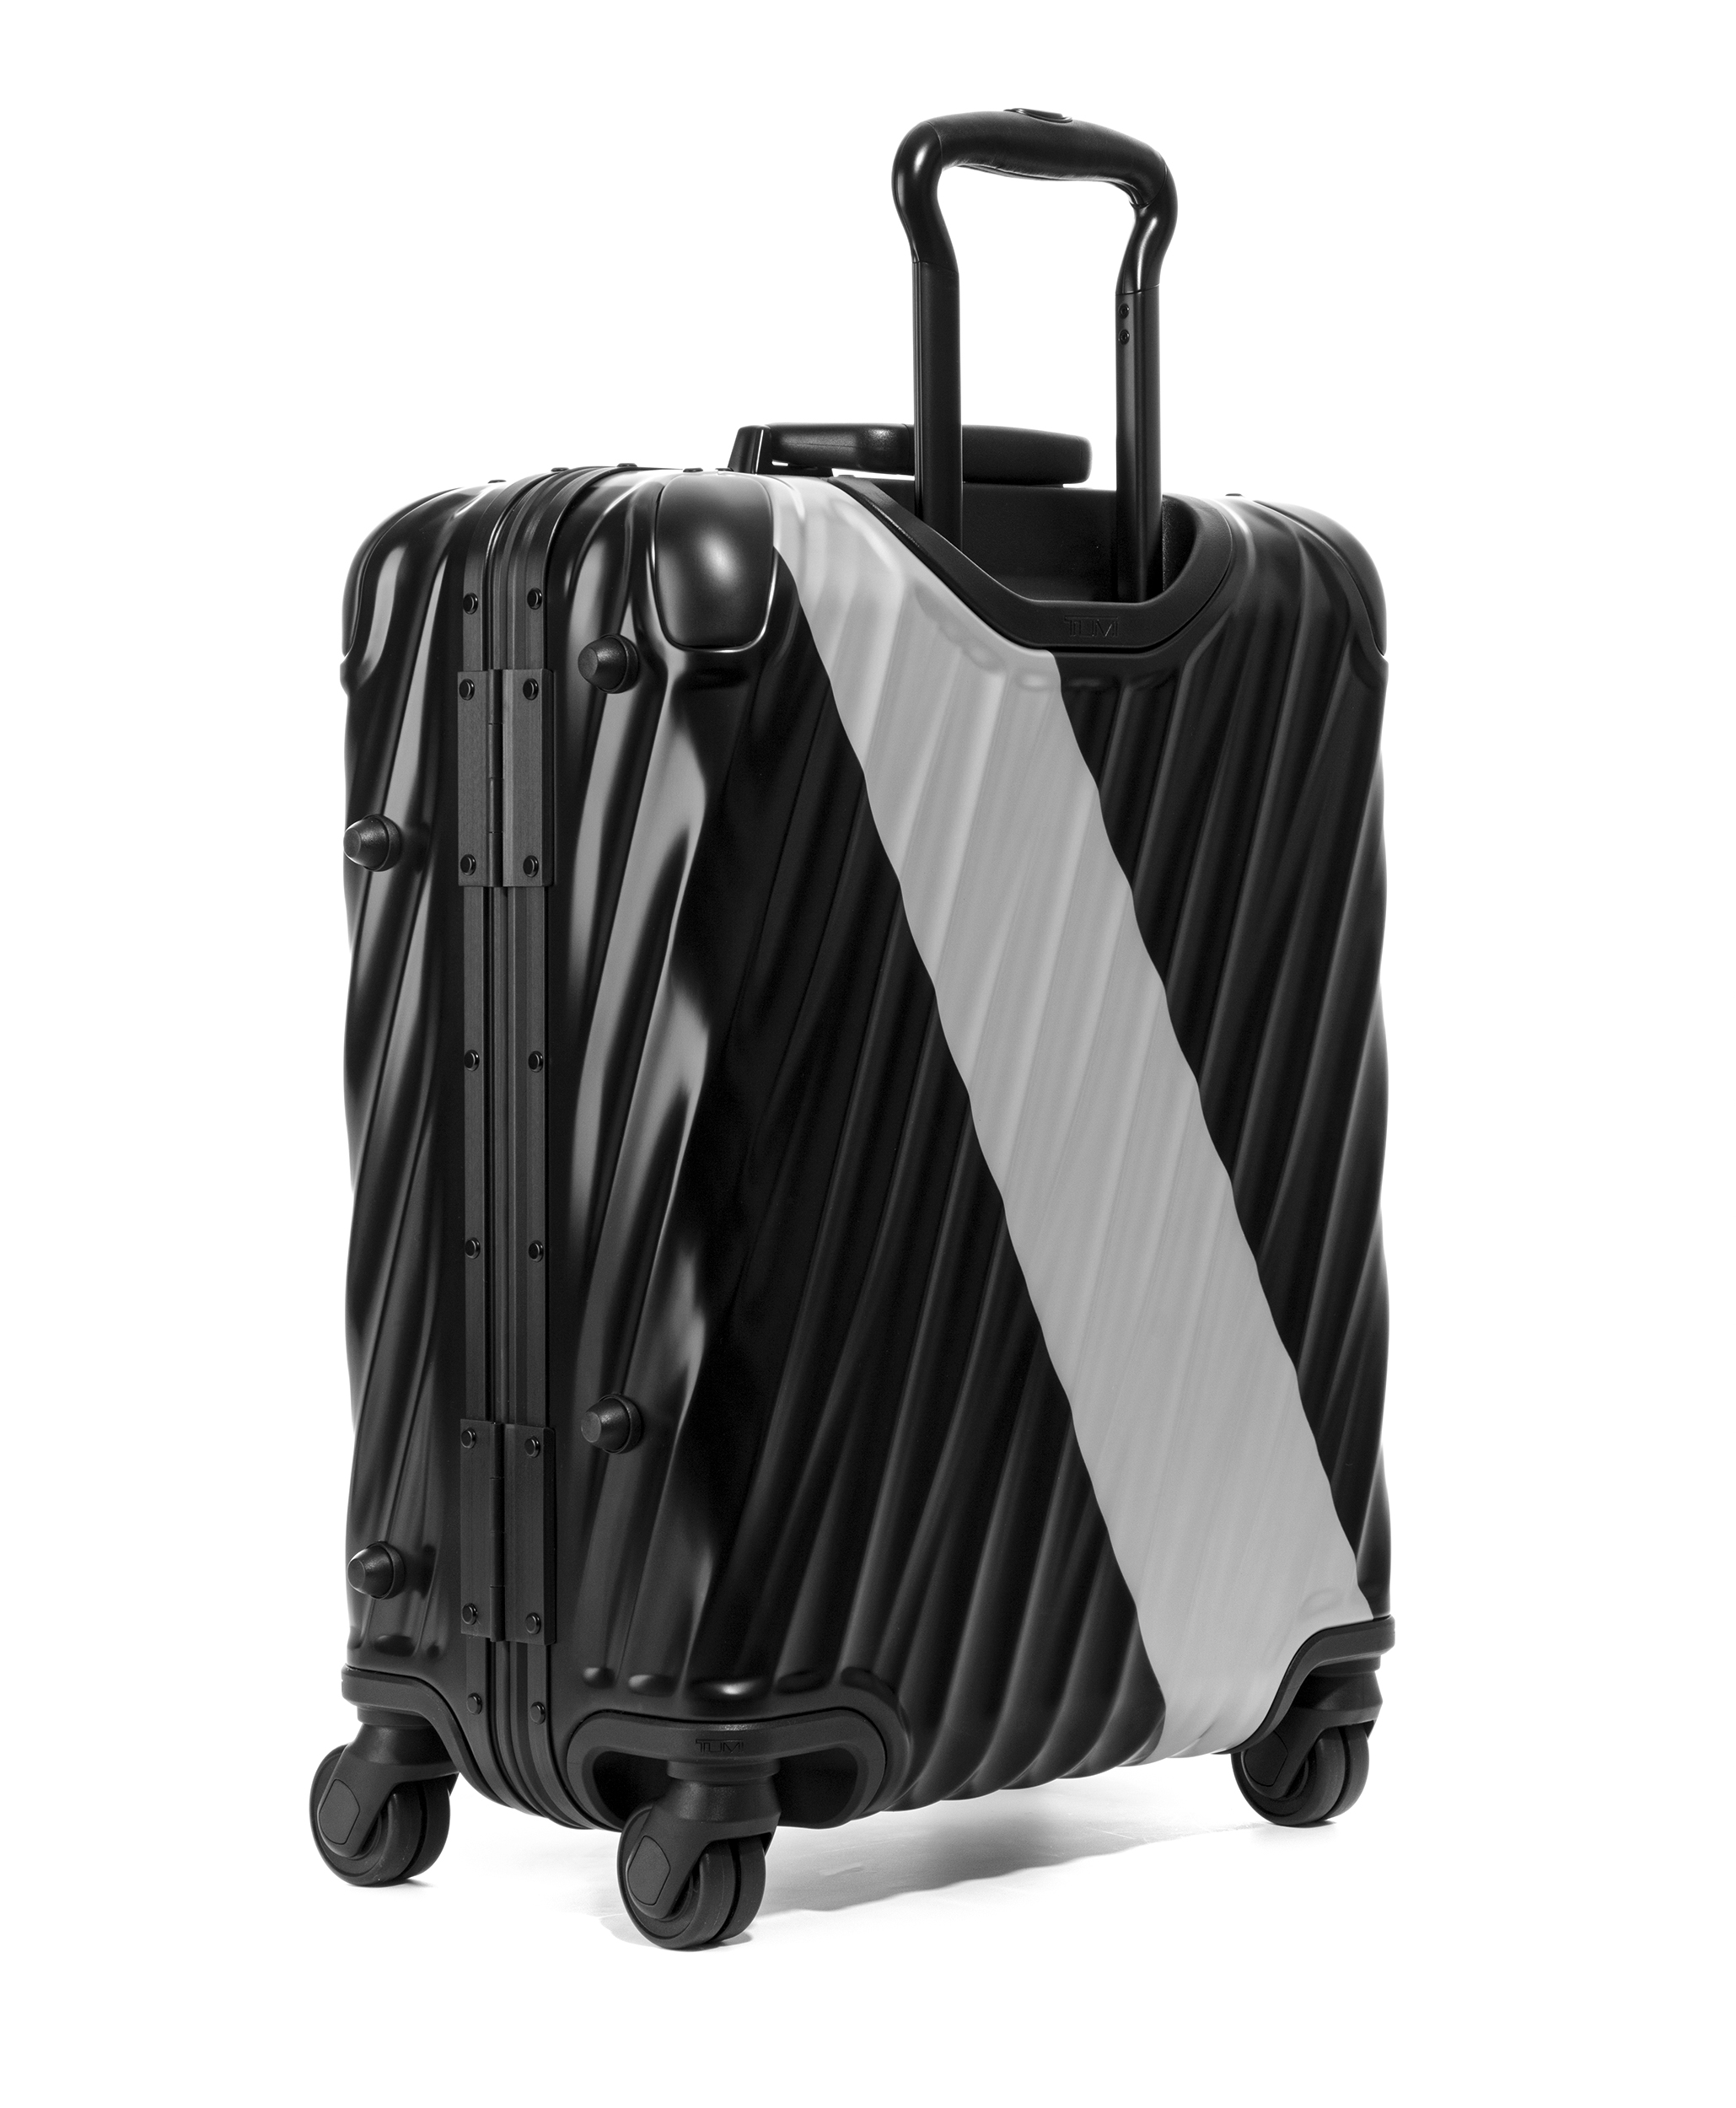 Carry-on Bag by TUMI